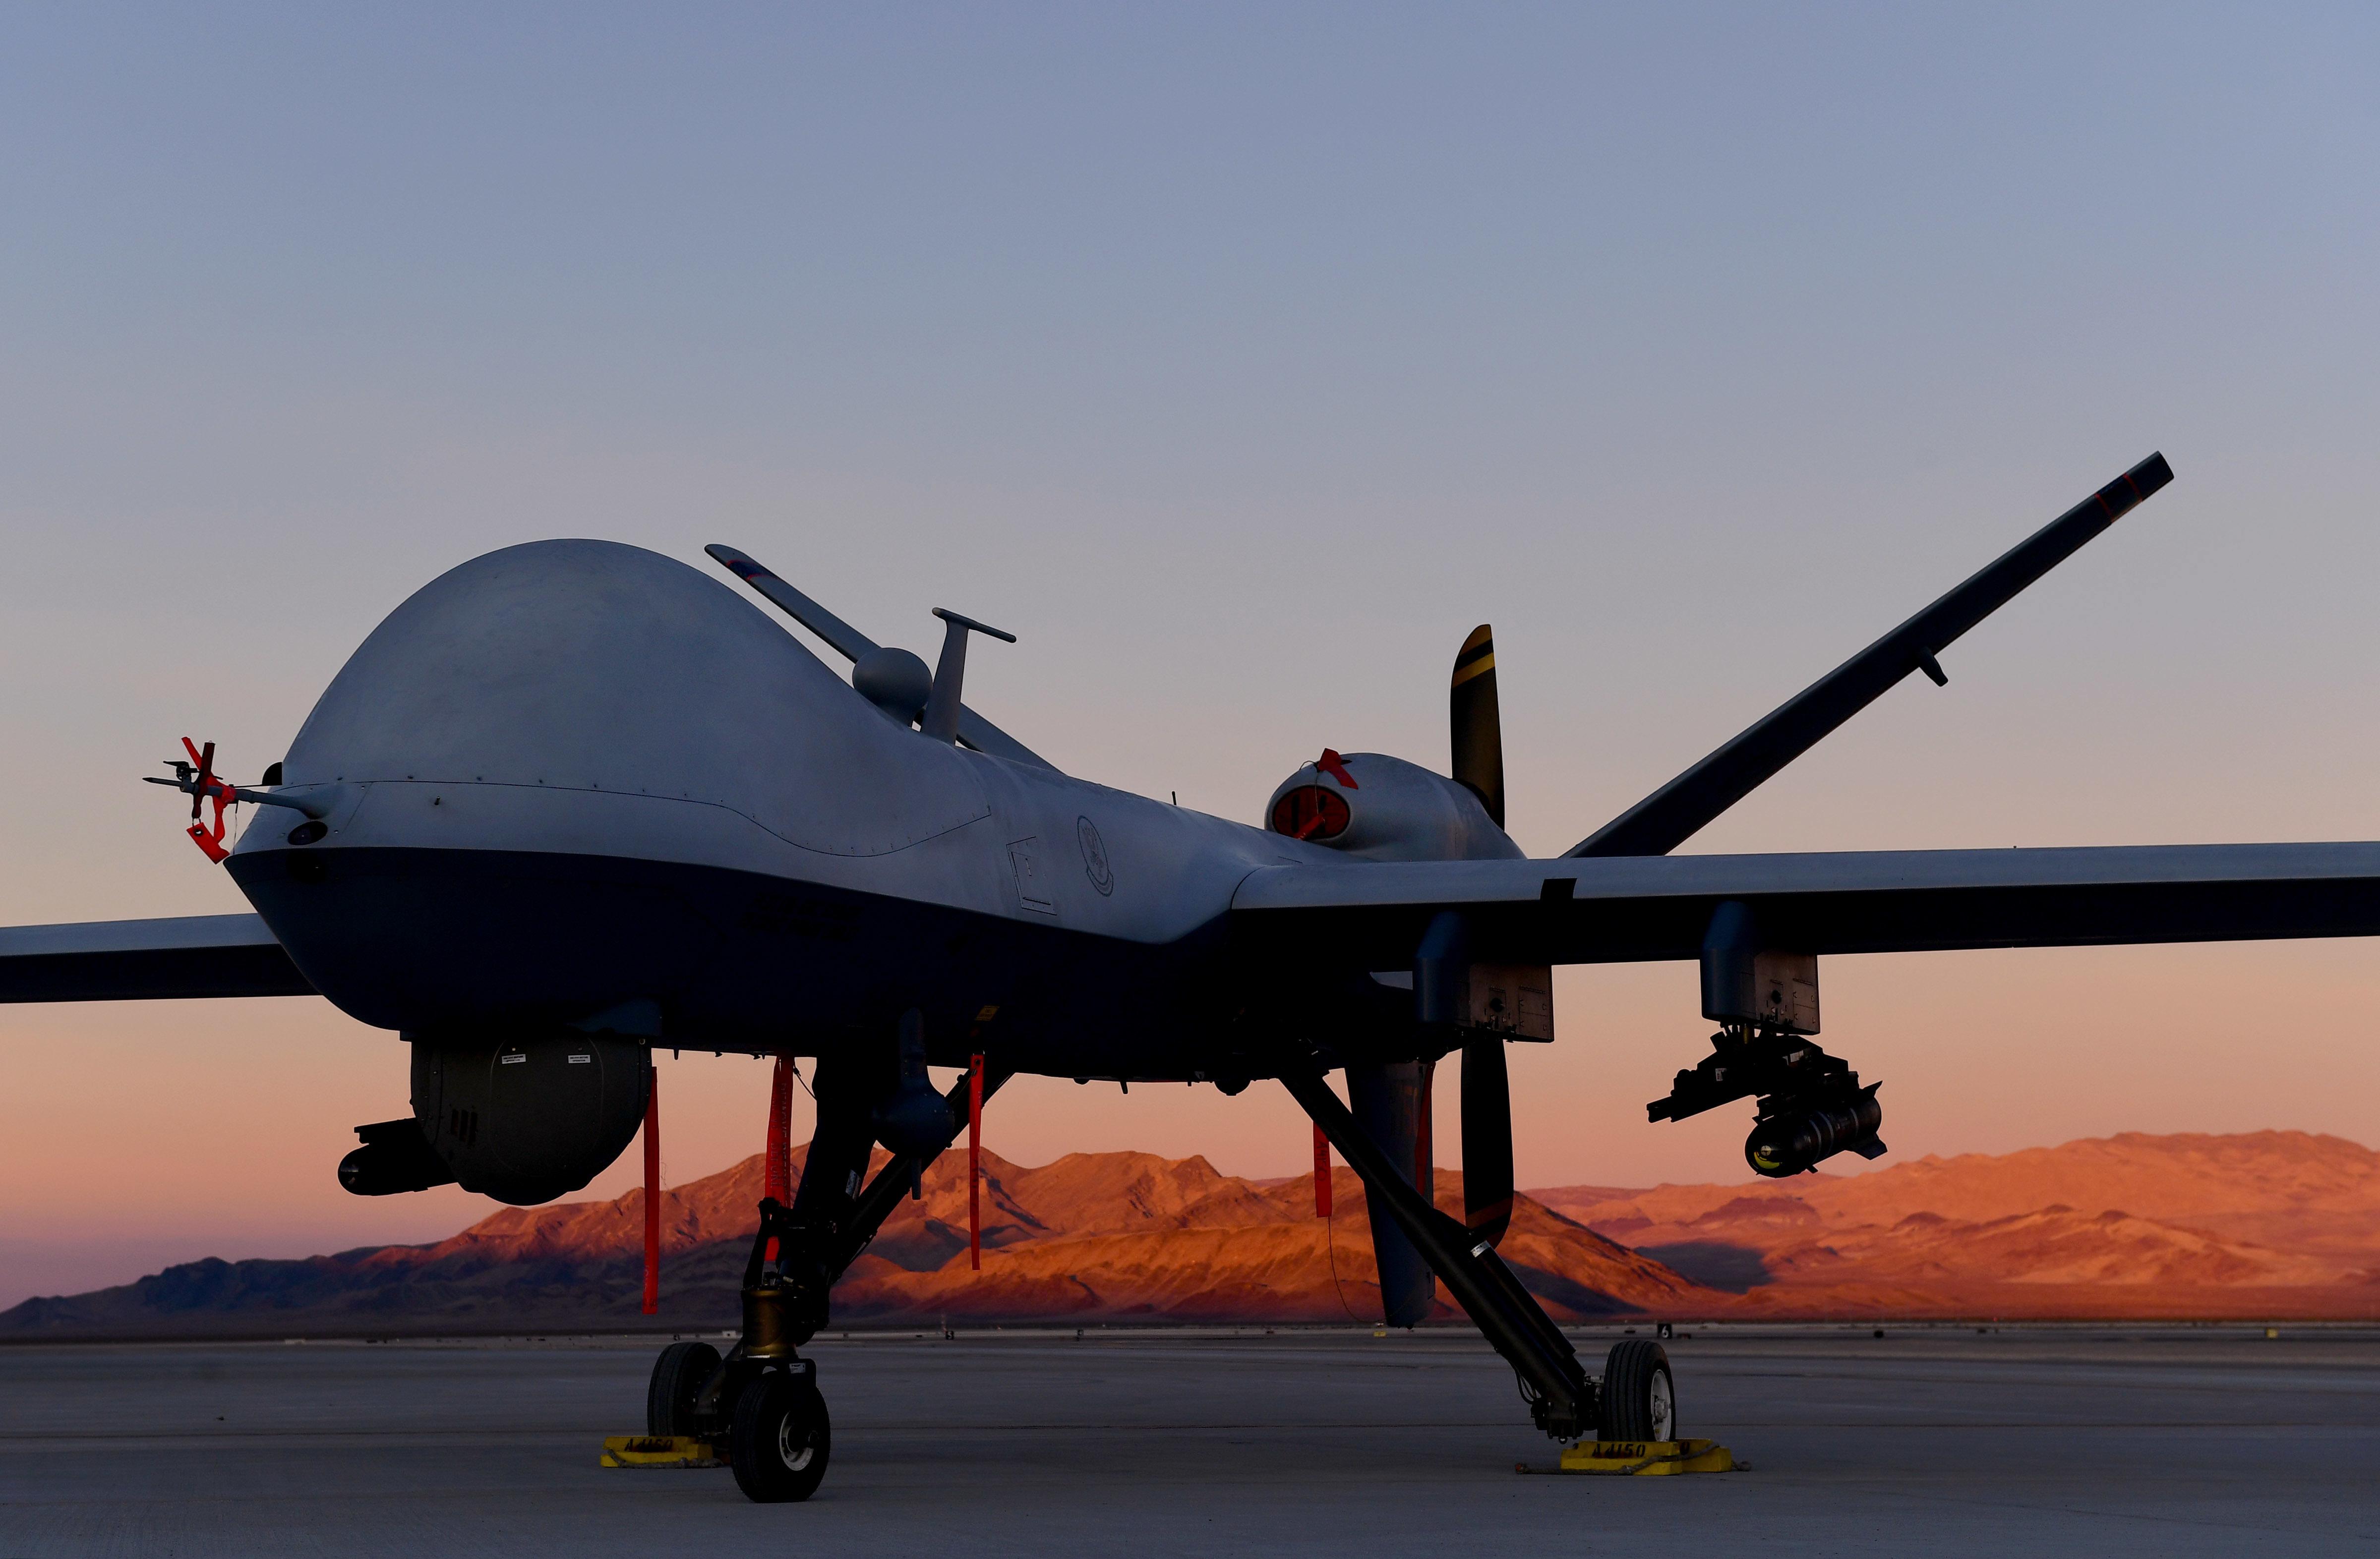 An MQ-9 Reaper sits on the flight line at Creech Air Force Base, Nevada, Dec. 17, 2019. The Remotely Piloted Aircraft enterprise is made of Airmen across all career fields to deliver justice to our Nation’s enemies 24/7/365. (U.S. Air Force photo by Senior Airman Haley Stevens)